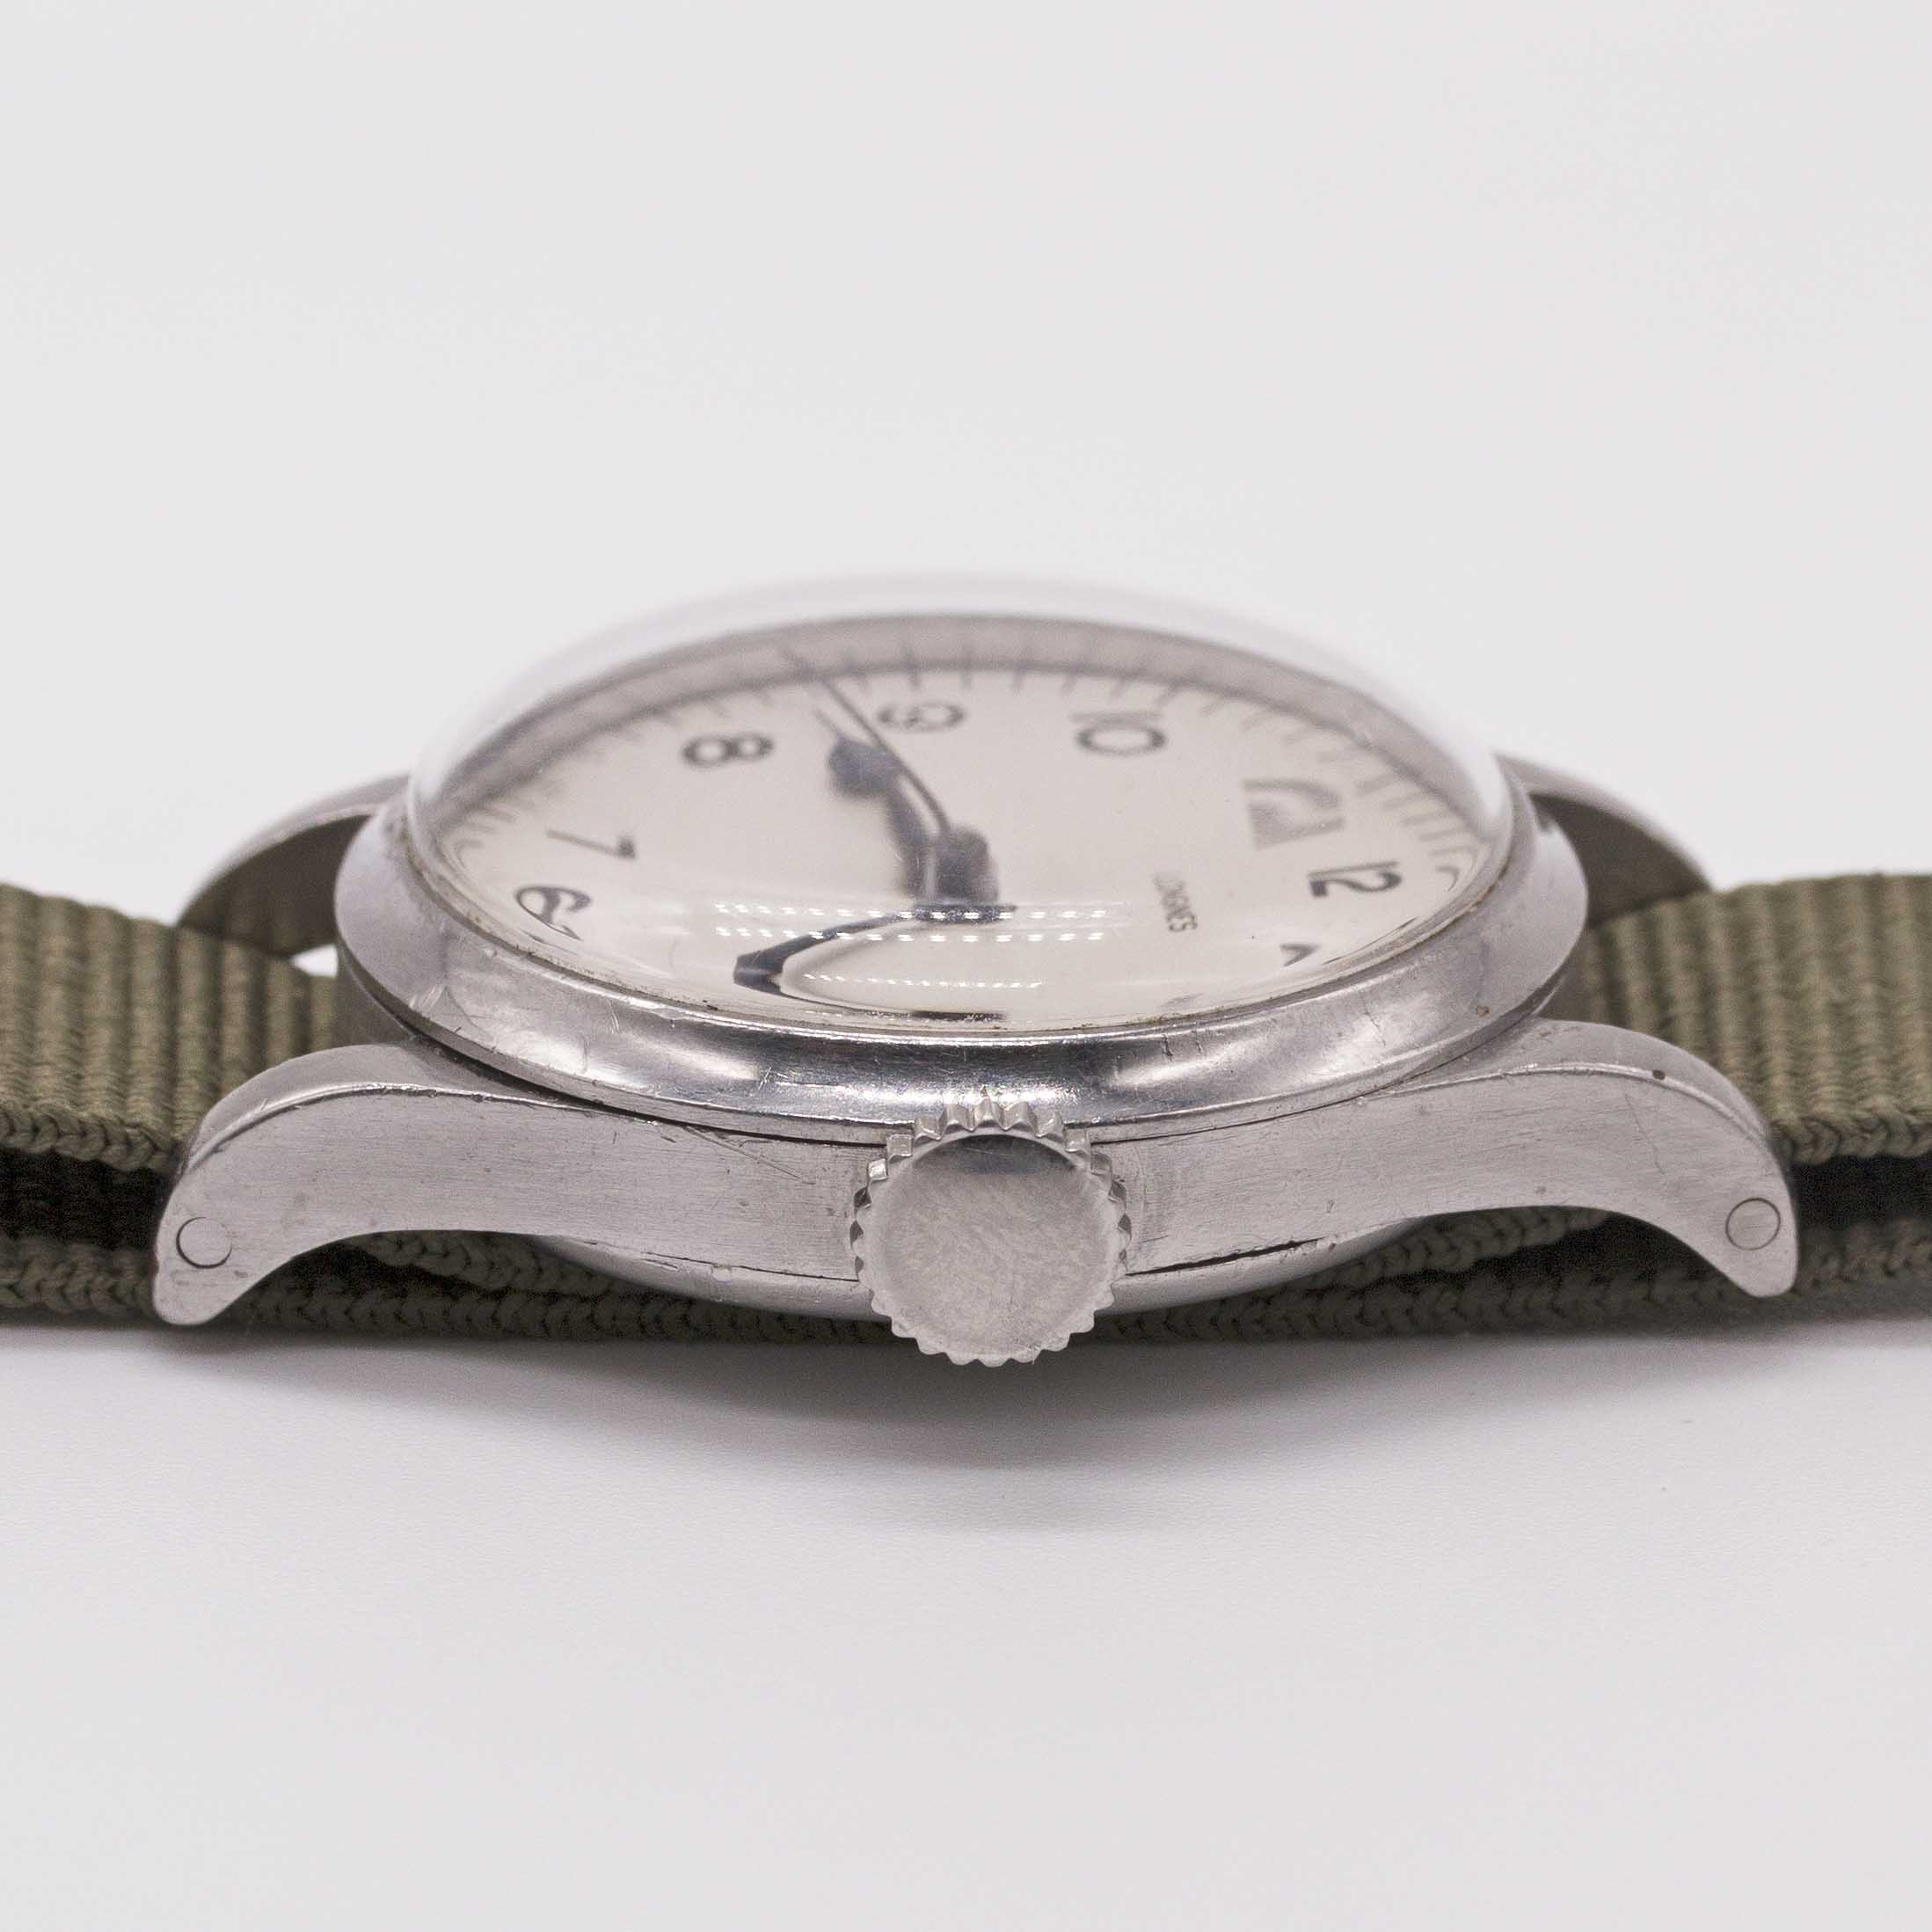 A GENTLEMAN'S BRITISH MILITARY LONGINES RAF PILOTS WRIST WATCH CIRCA 1940, WITH WHITE MOD DIAL - Image 8 of 9